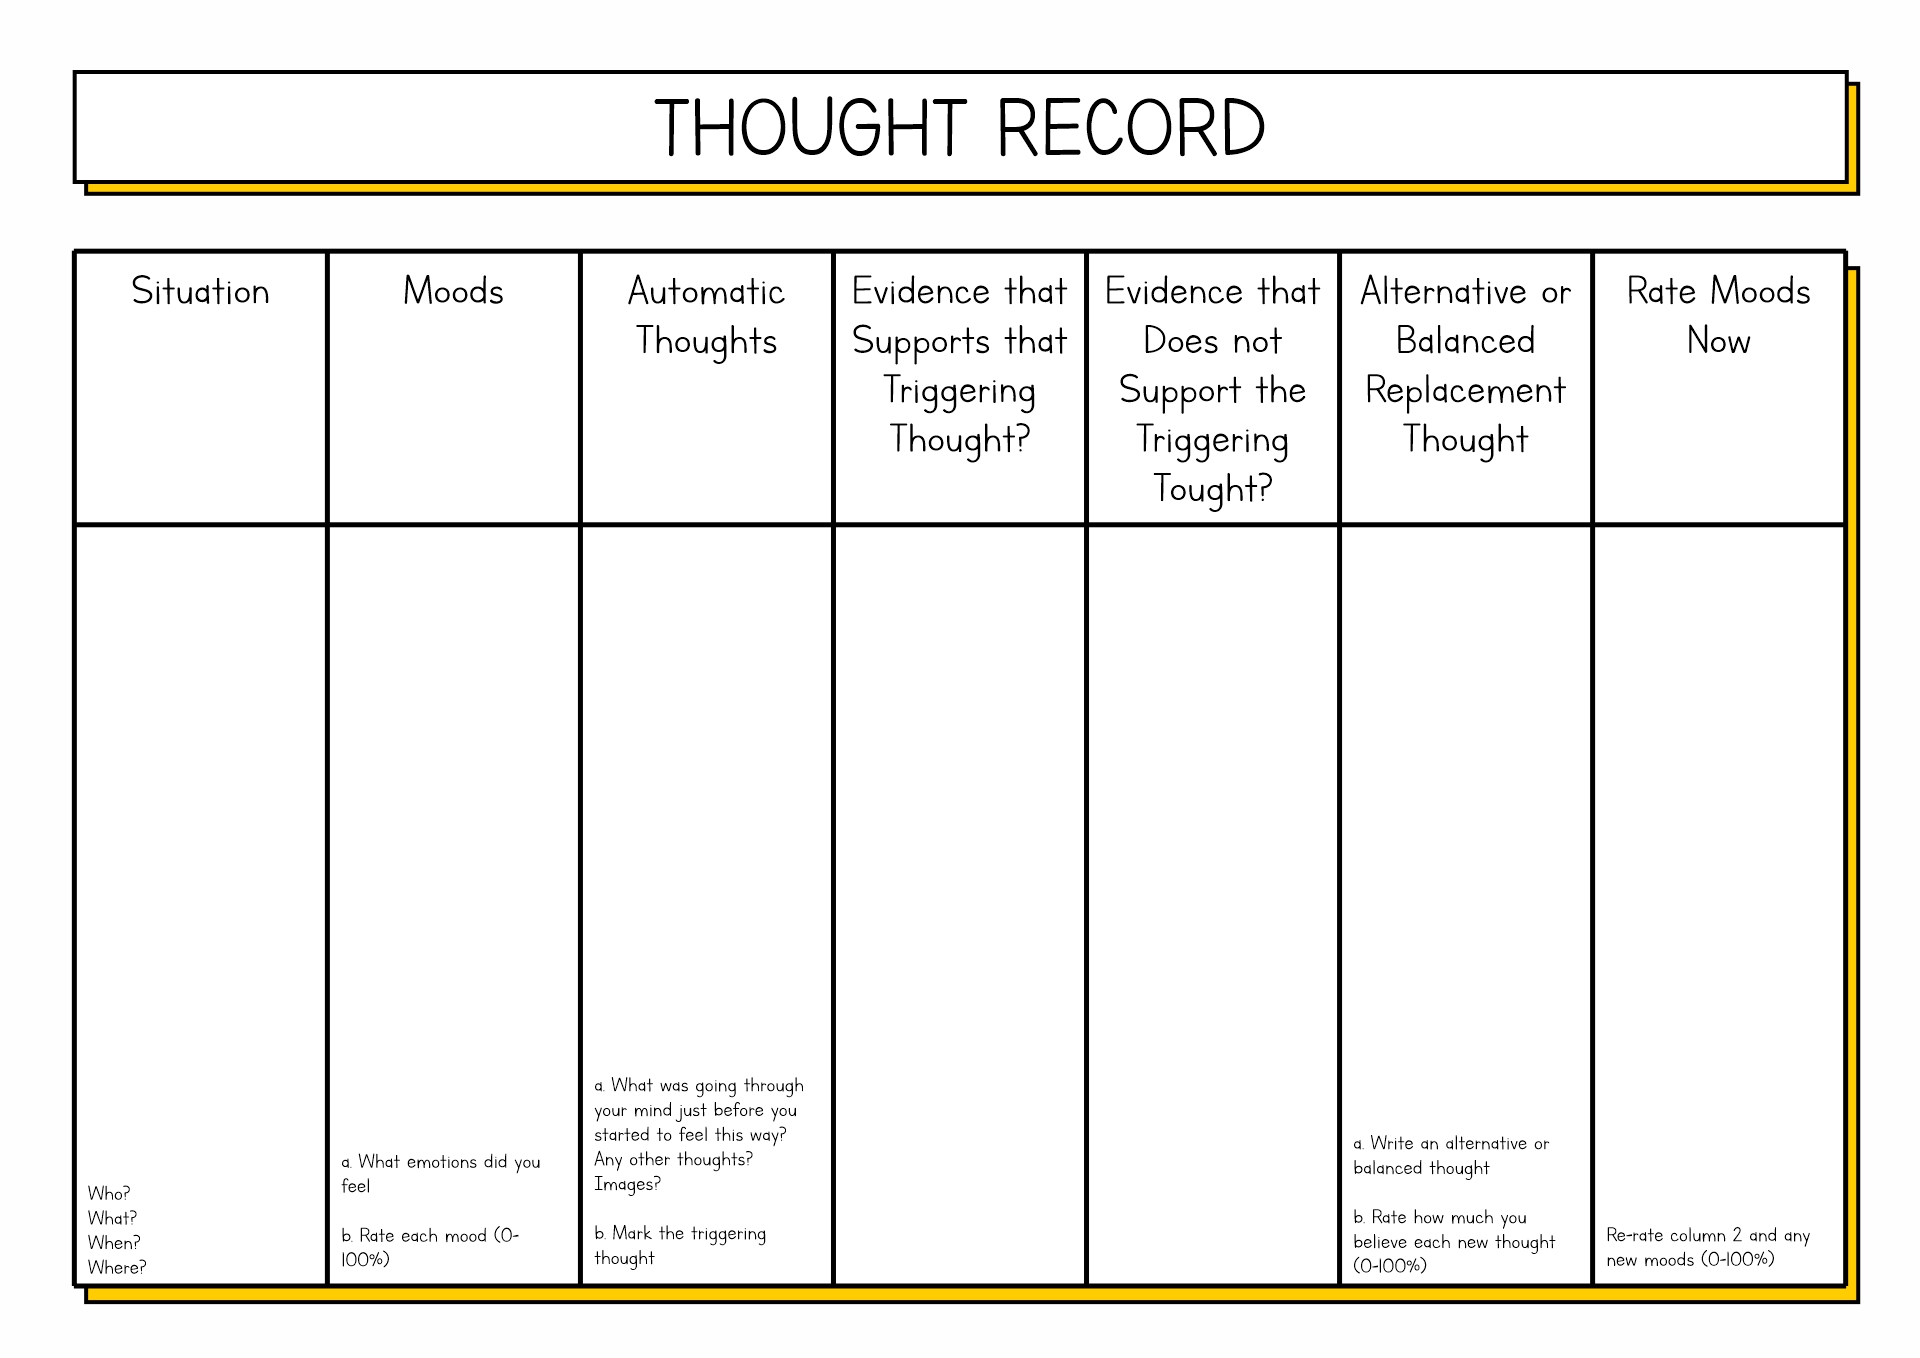 17-best-images-of-cognitive-behavioral-thought-worksheets-cognitive-behavioral-therapy